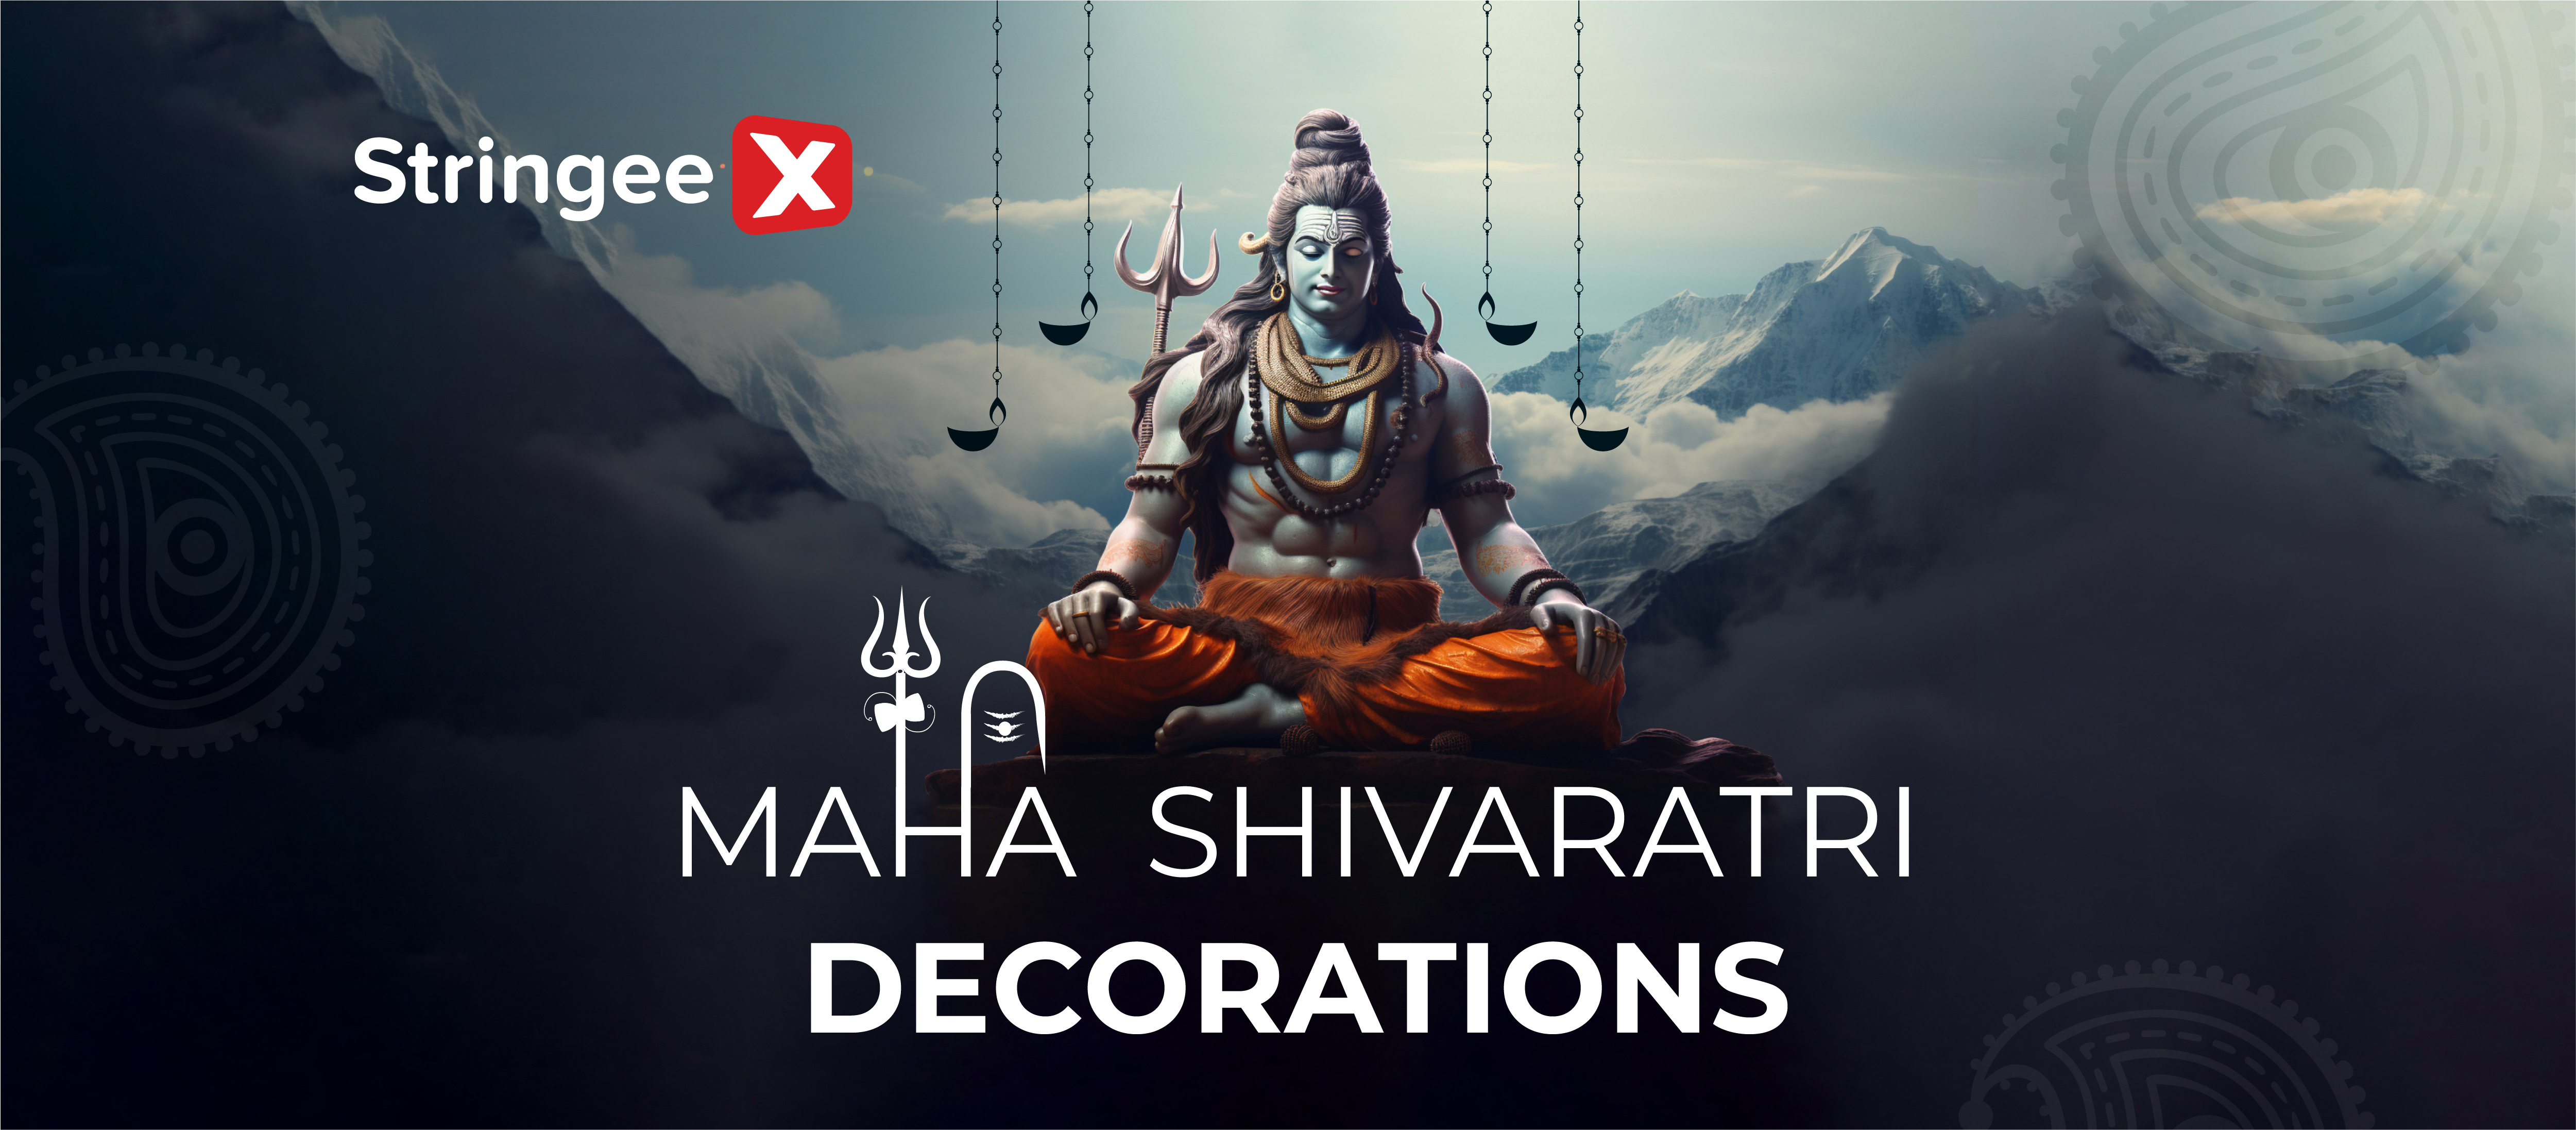 What Are The Best Maha Shivaratri Decorations? Top 6 Best Ideas